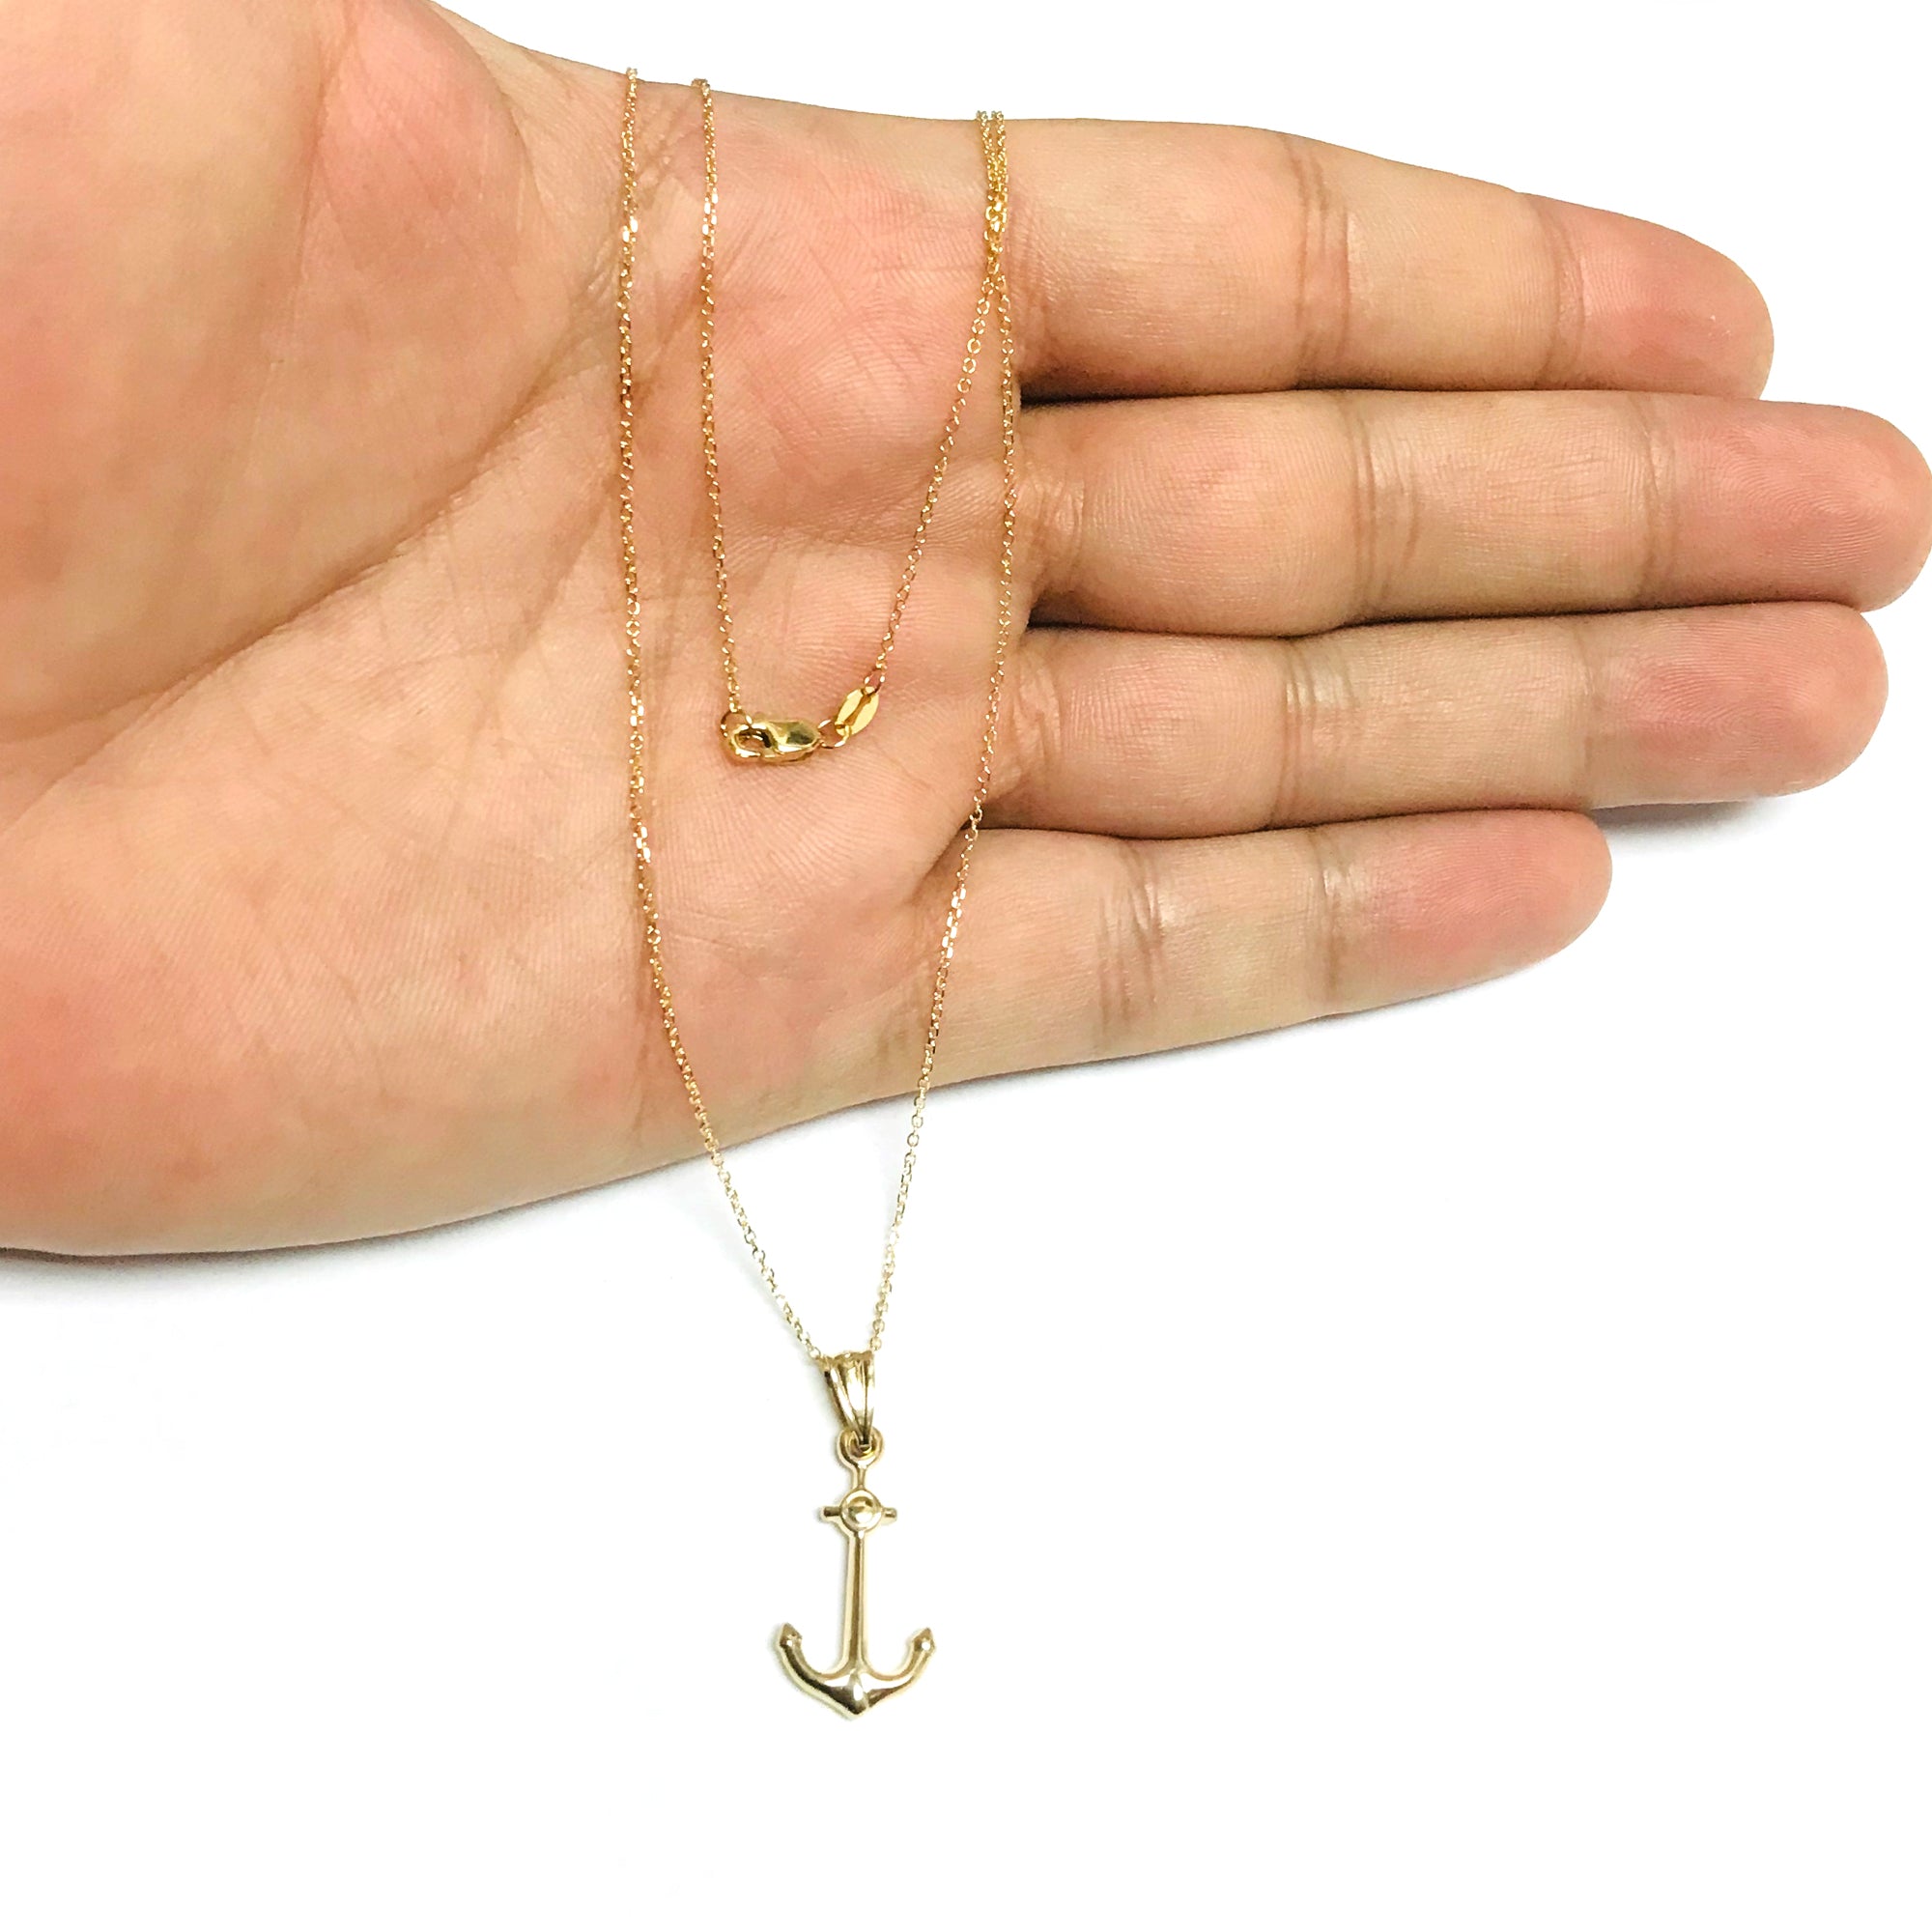 14k Yellow Gold Anchor Pendant Chain Necklace, 18" fine designer jewelry for men and women